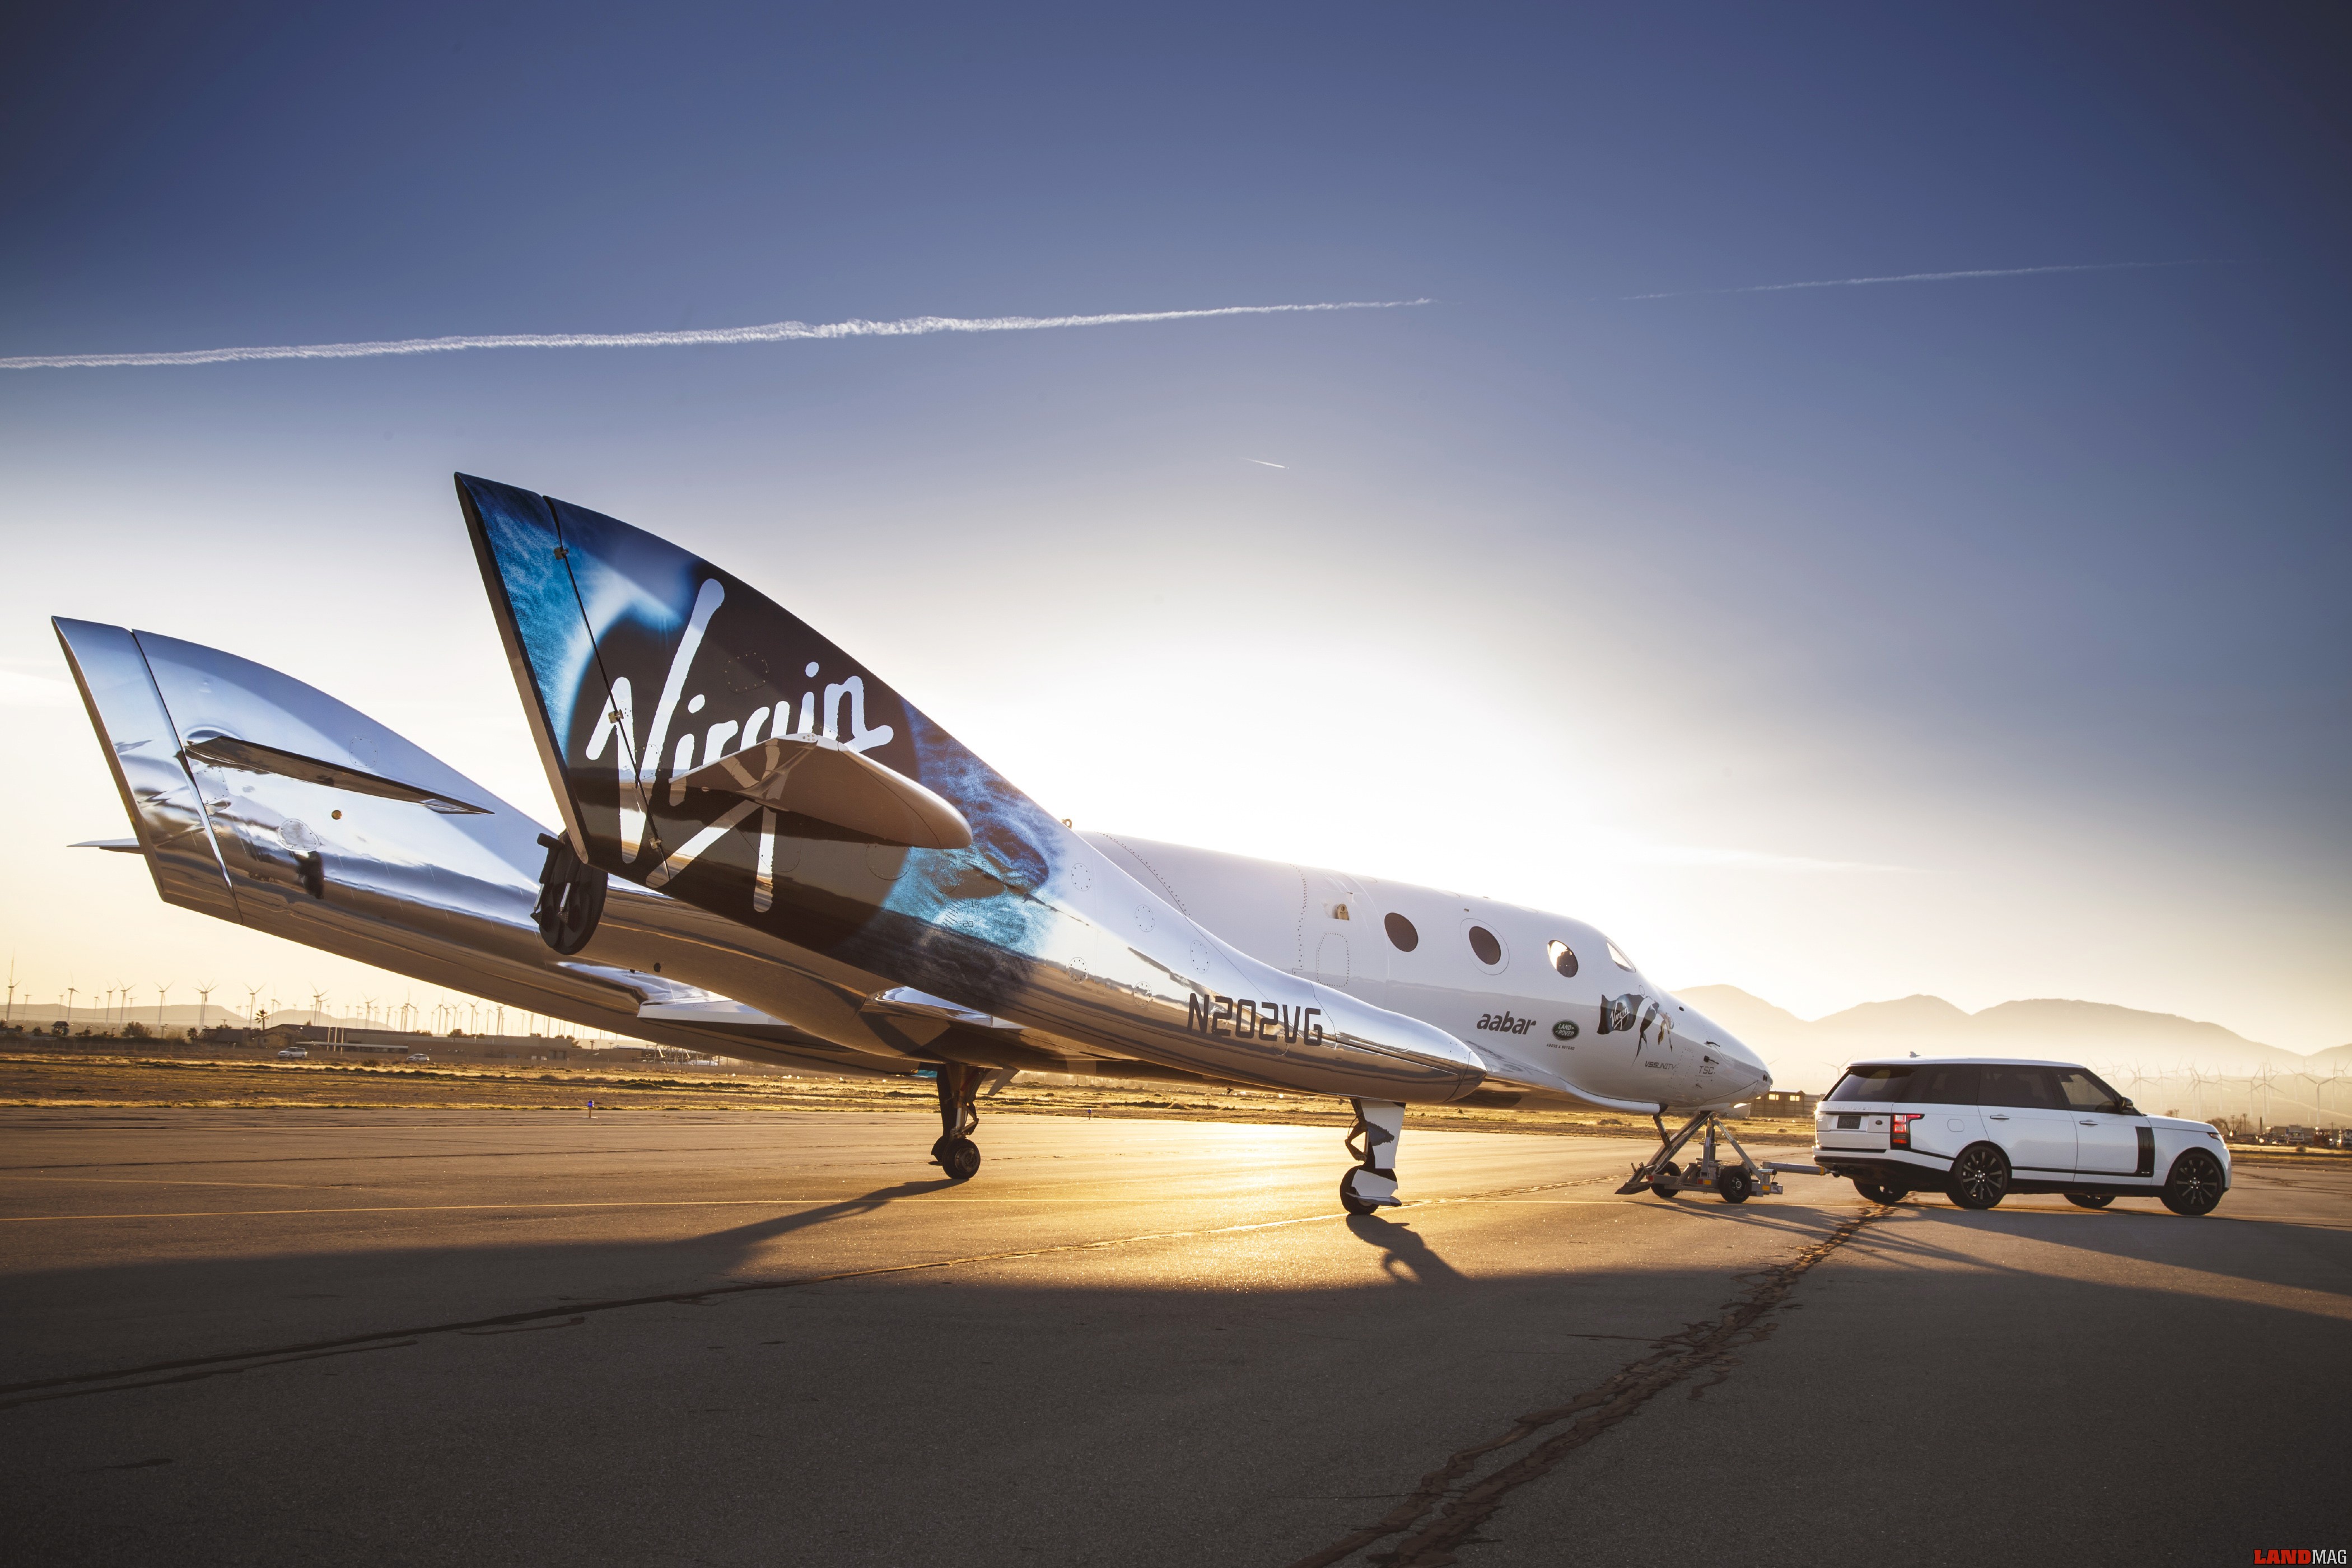 Land Rover’s partnership with Virgin Galactic celebrated as Range Rover Autobiography tows new spaceship VSS Unity at global reveal and naming event with Sir Richard Branson at the Mojave Air and Space Port, California, USA